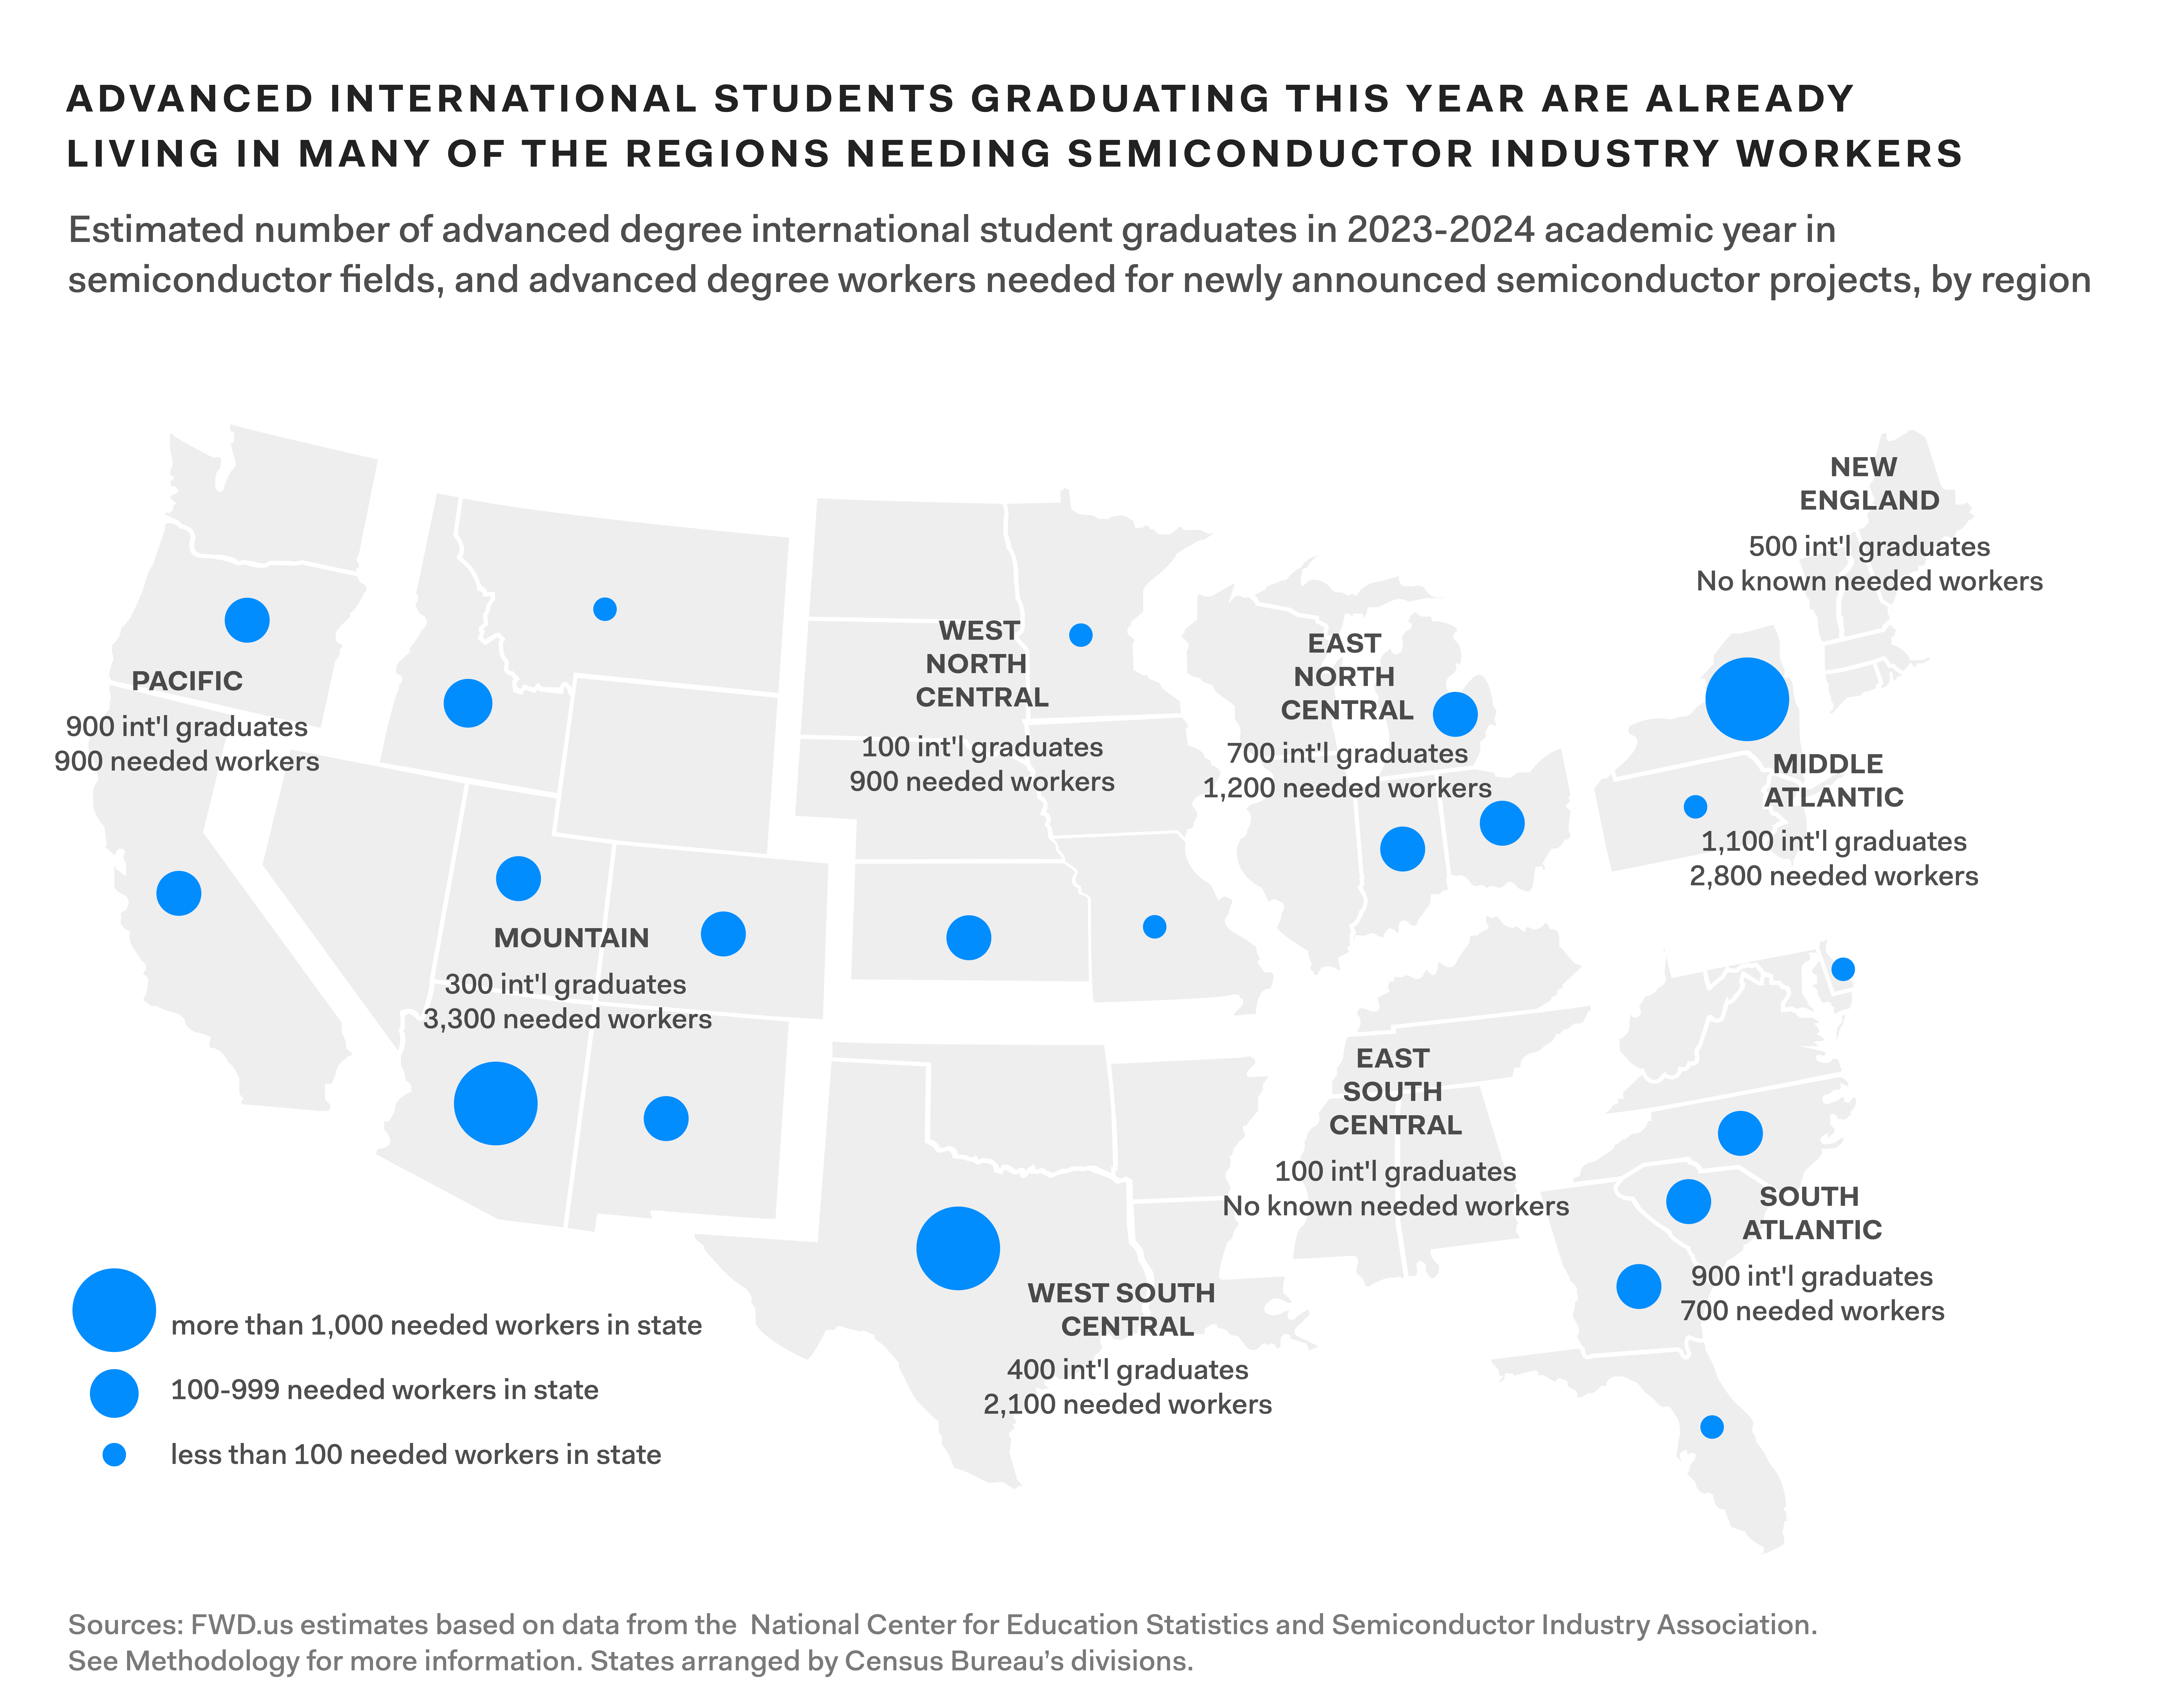 A map of the United States, broken out into regions, identifying how many semiconductor jobs will need to be filled in each region, and how many international students are expected to graduate with advanced semiconductor-related degrees in those regions this year